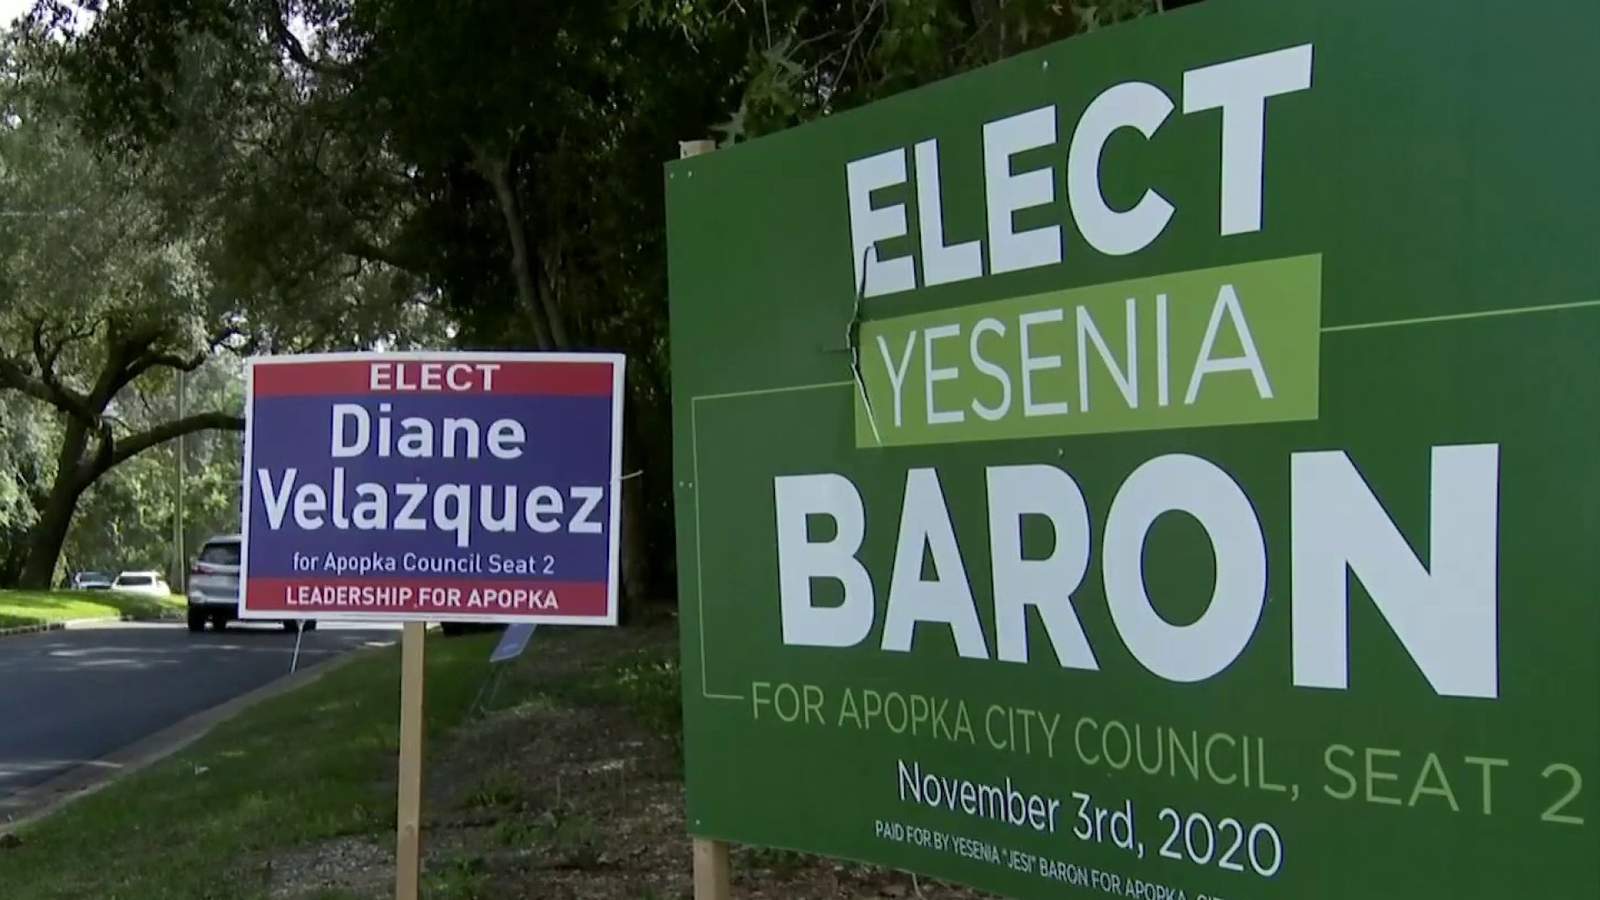 Here’s why we don’t know who won Apopka City Council seat 2